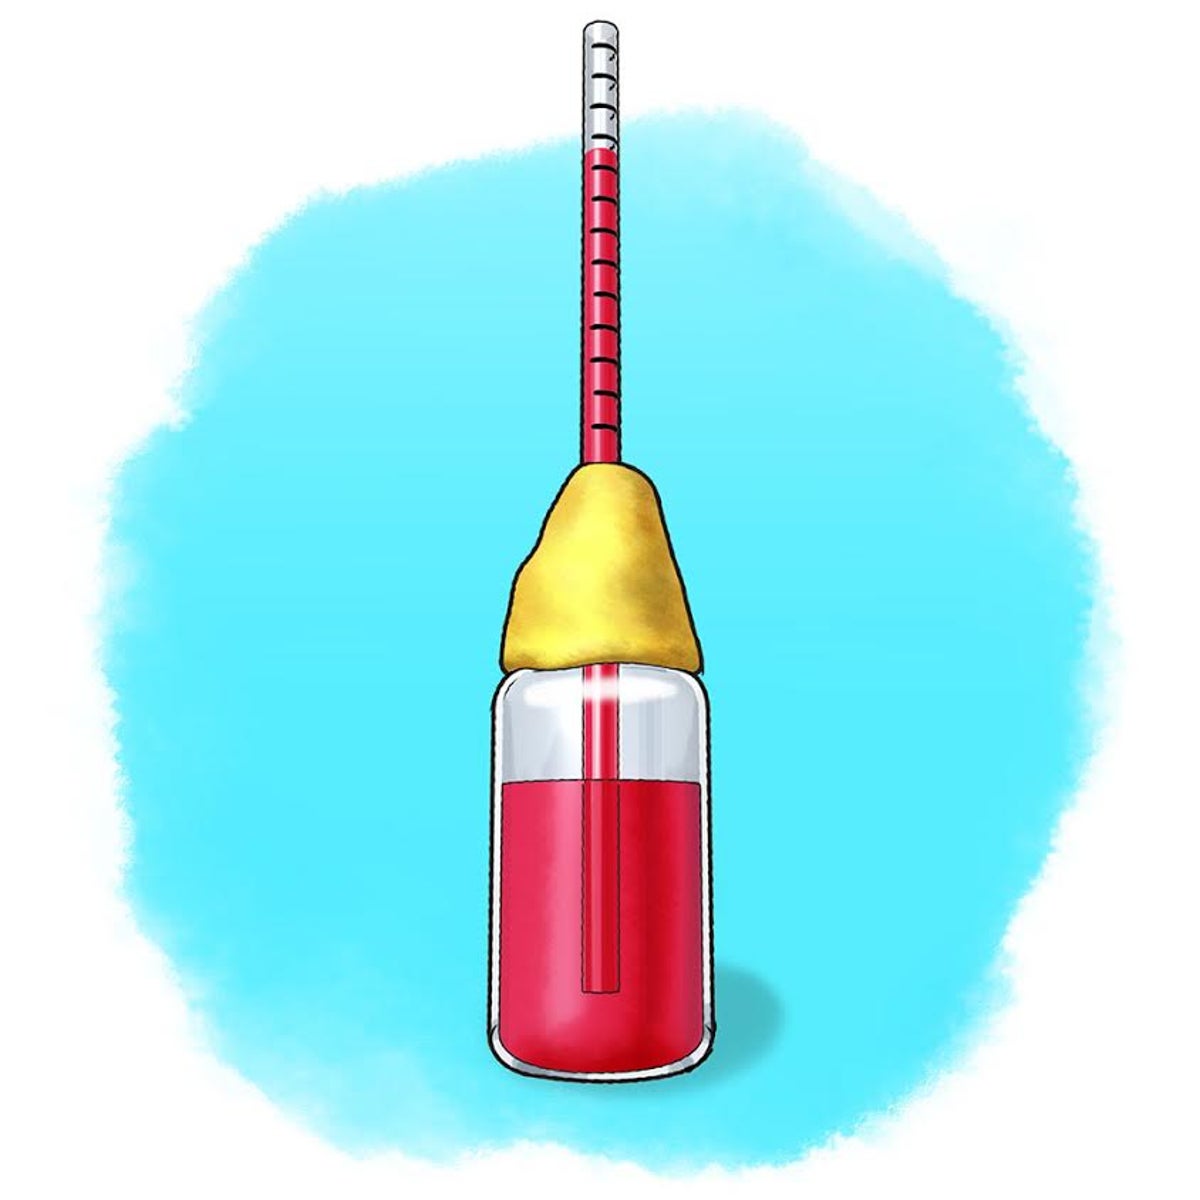 Bottle Thermometer Experiment